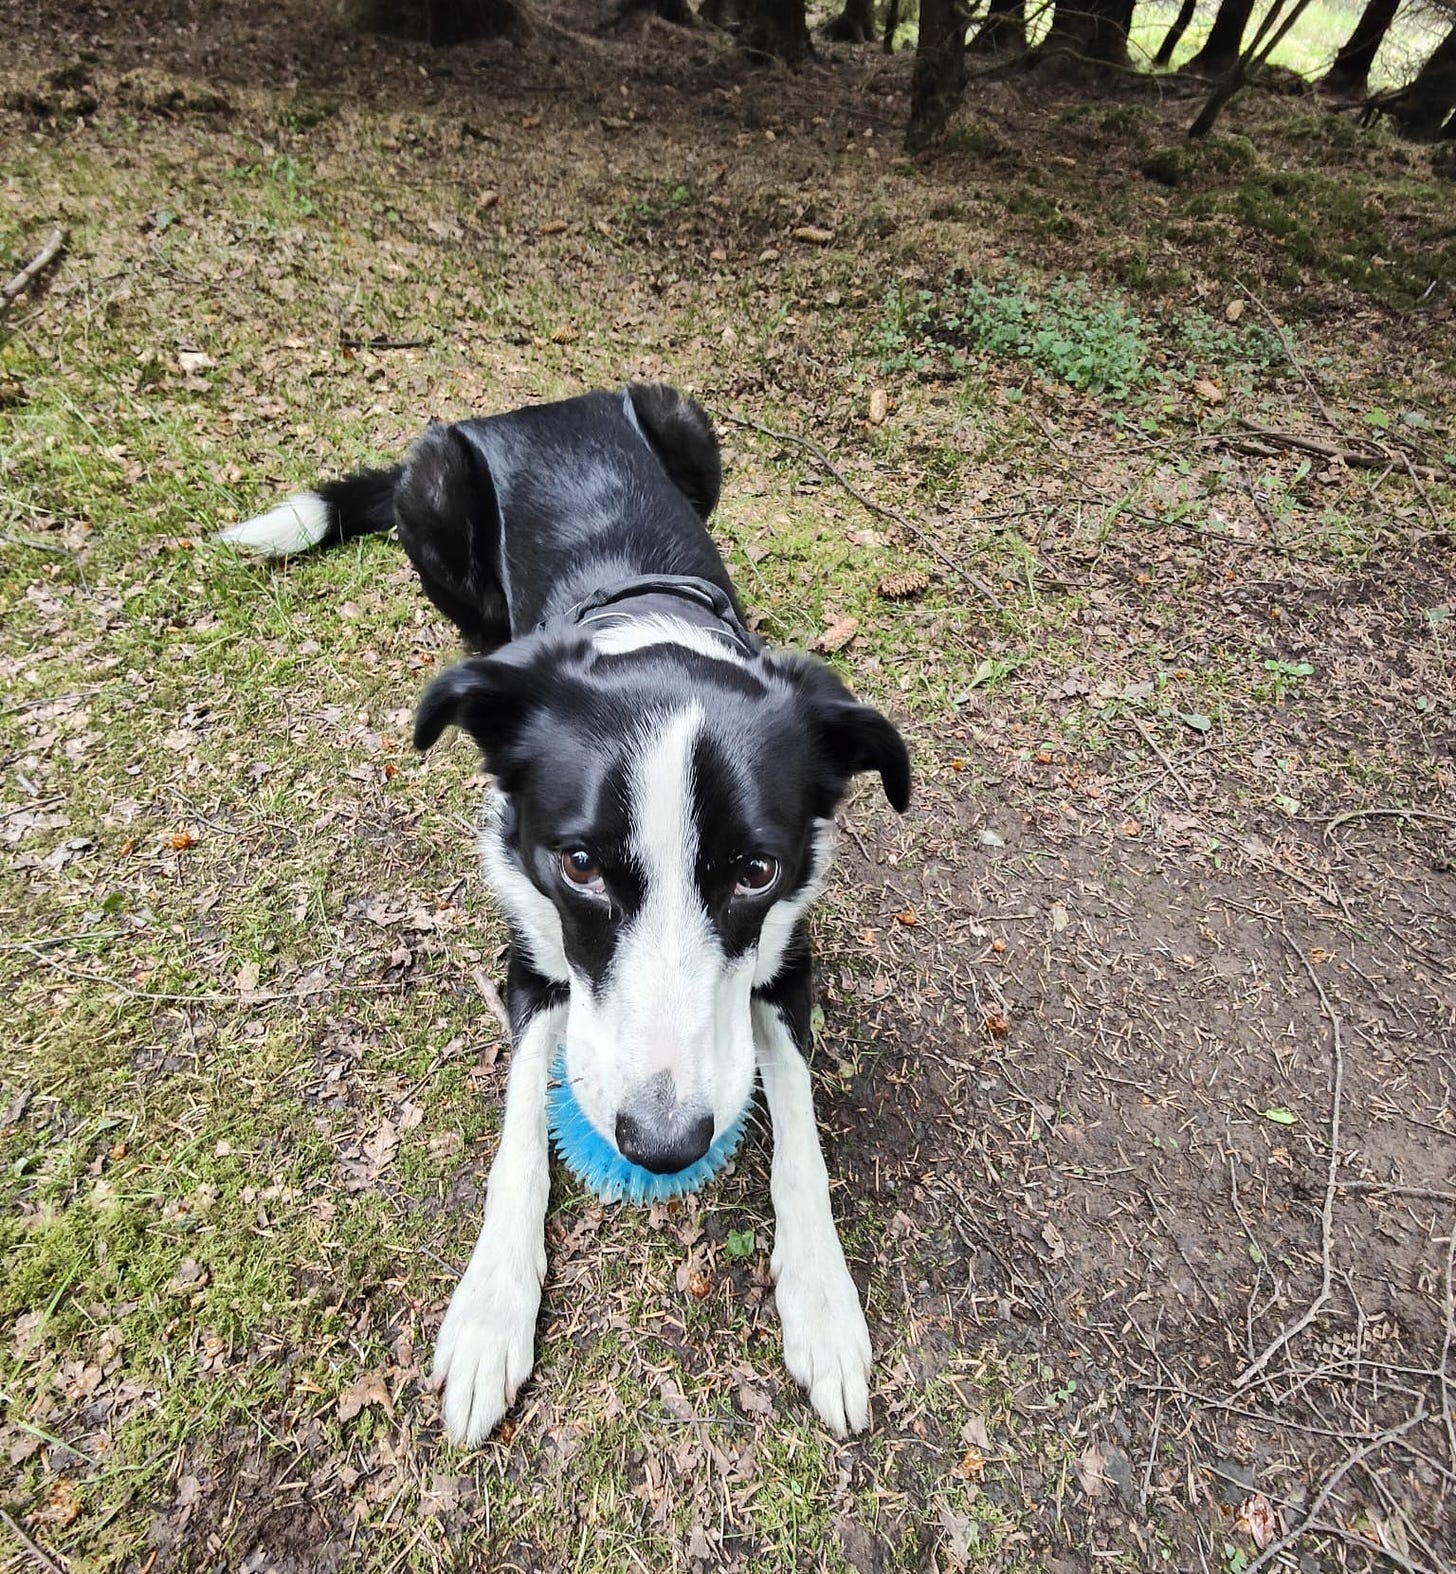 Colour photo of a black and white dog with a blue ball in her mouth